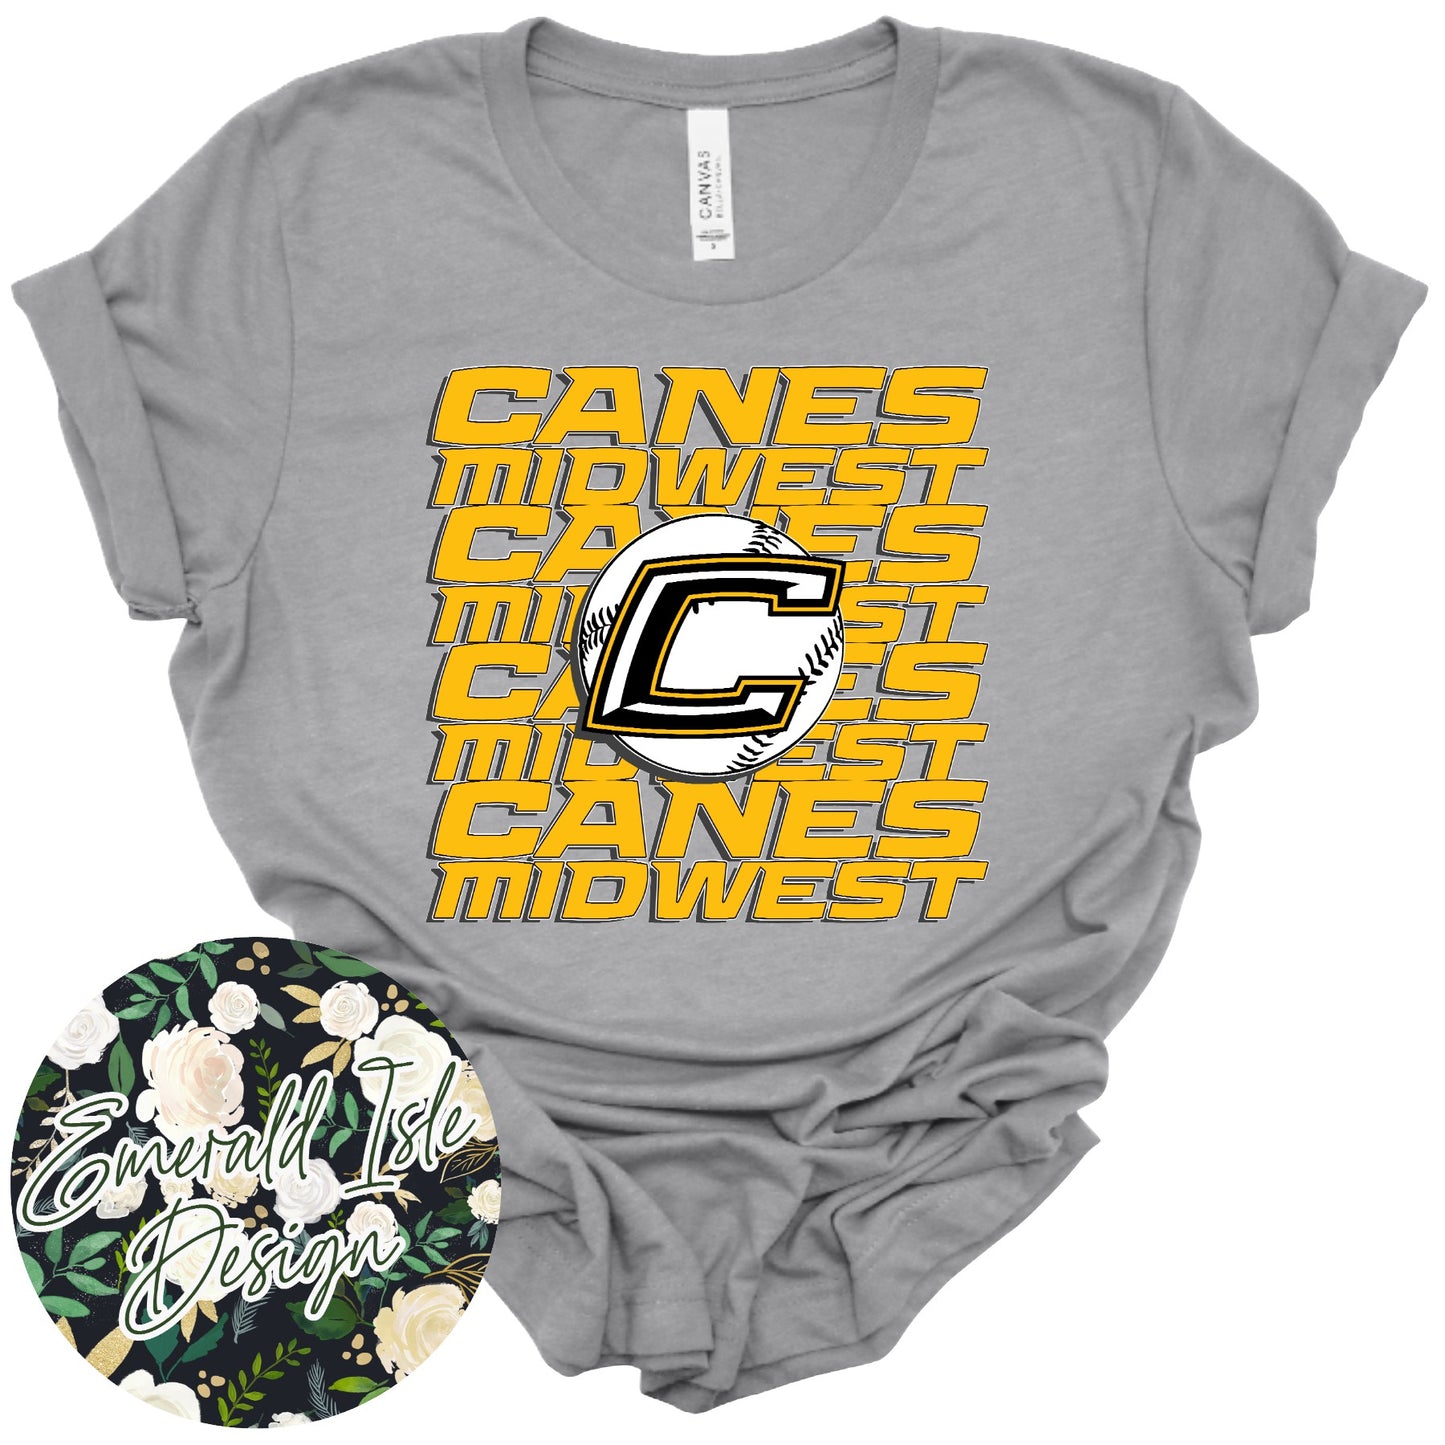 Canes Midwest Repeat Design